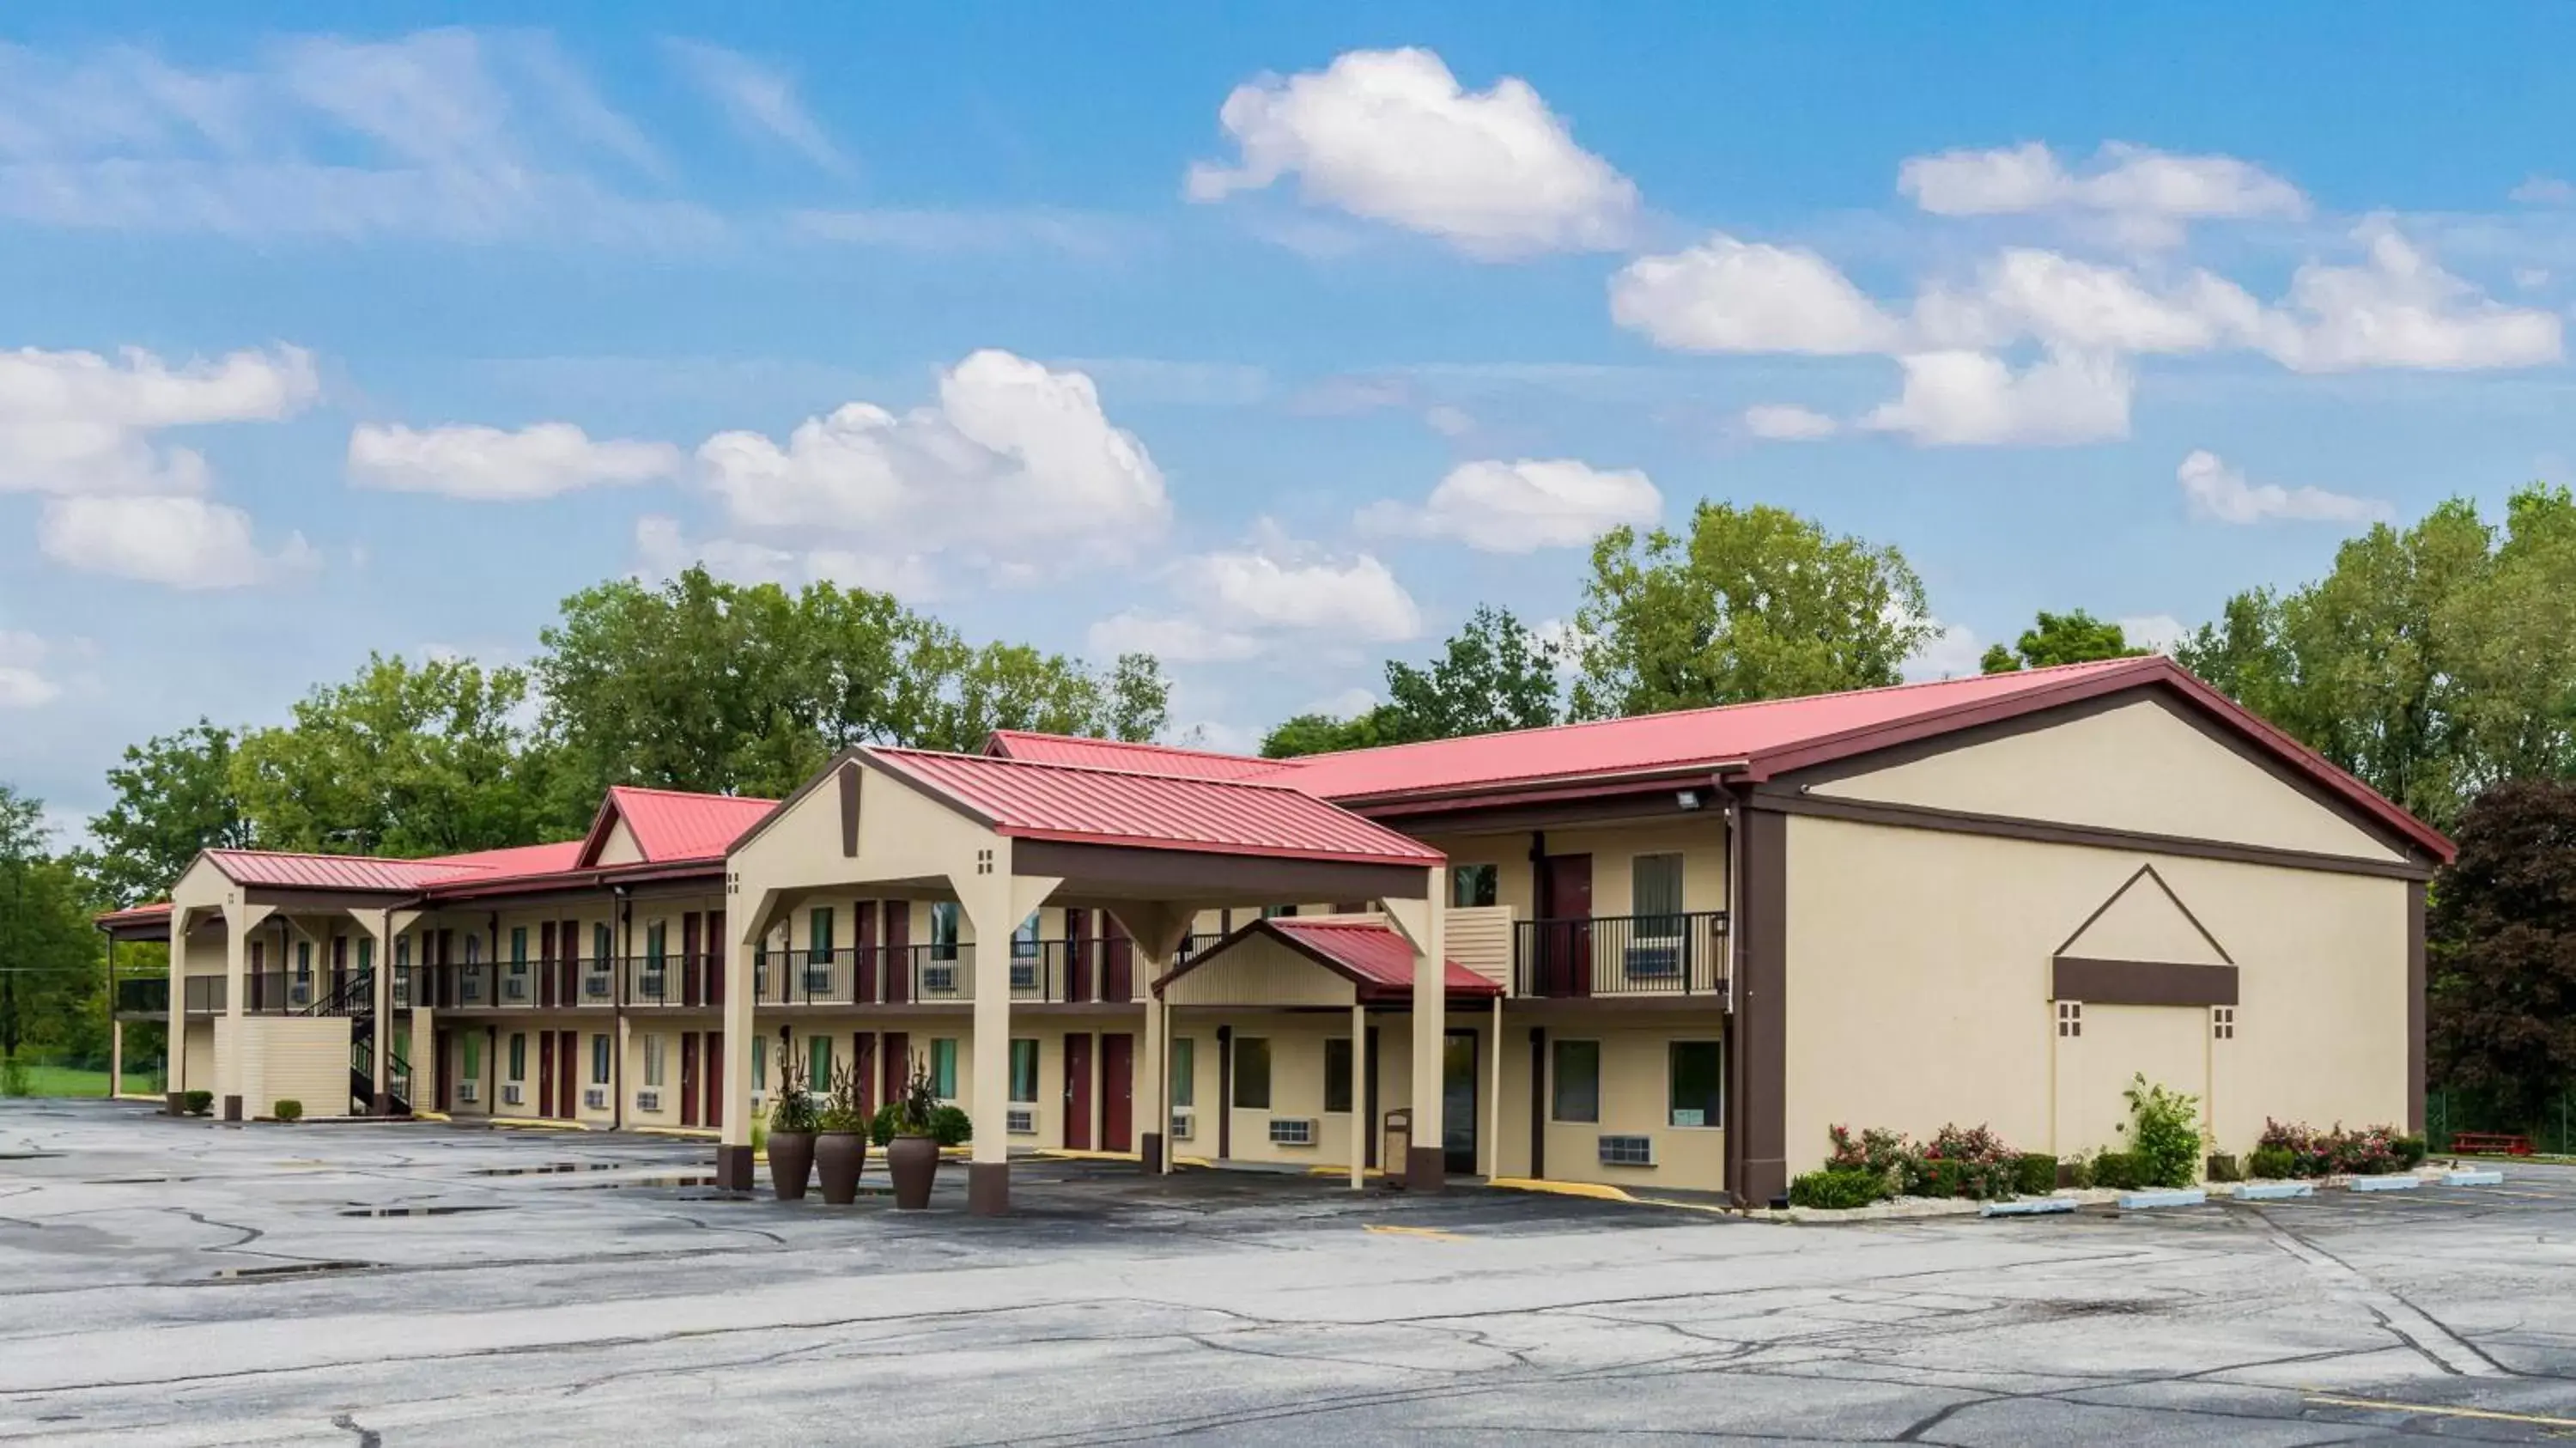 Property Building in Red Roof Inn Marion, IN